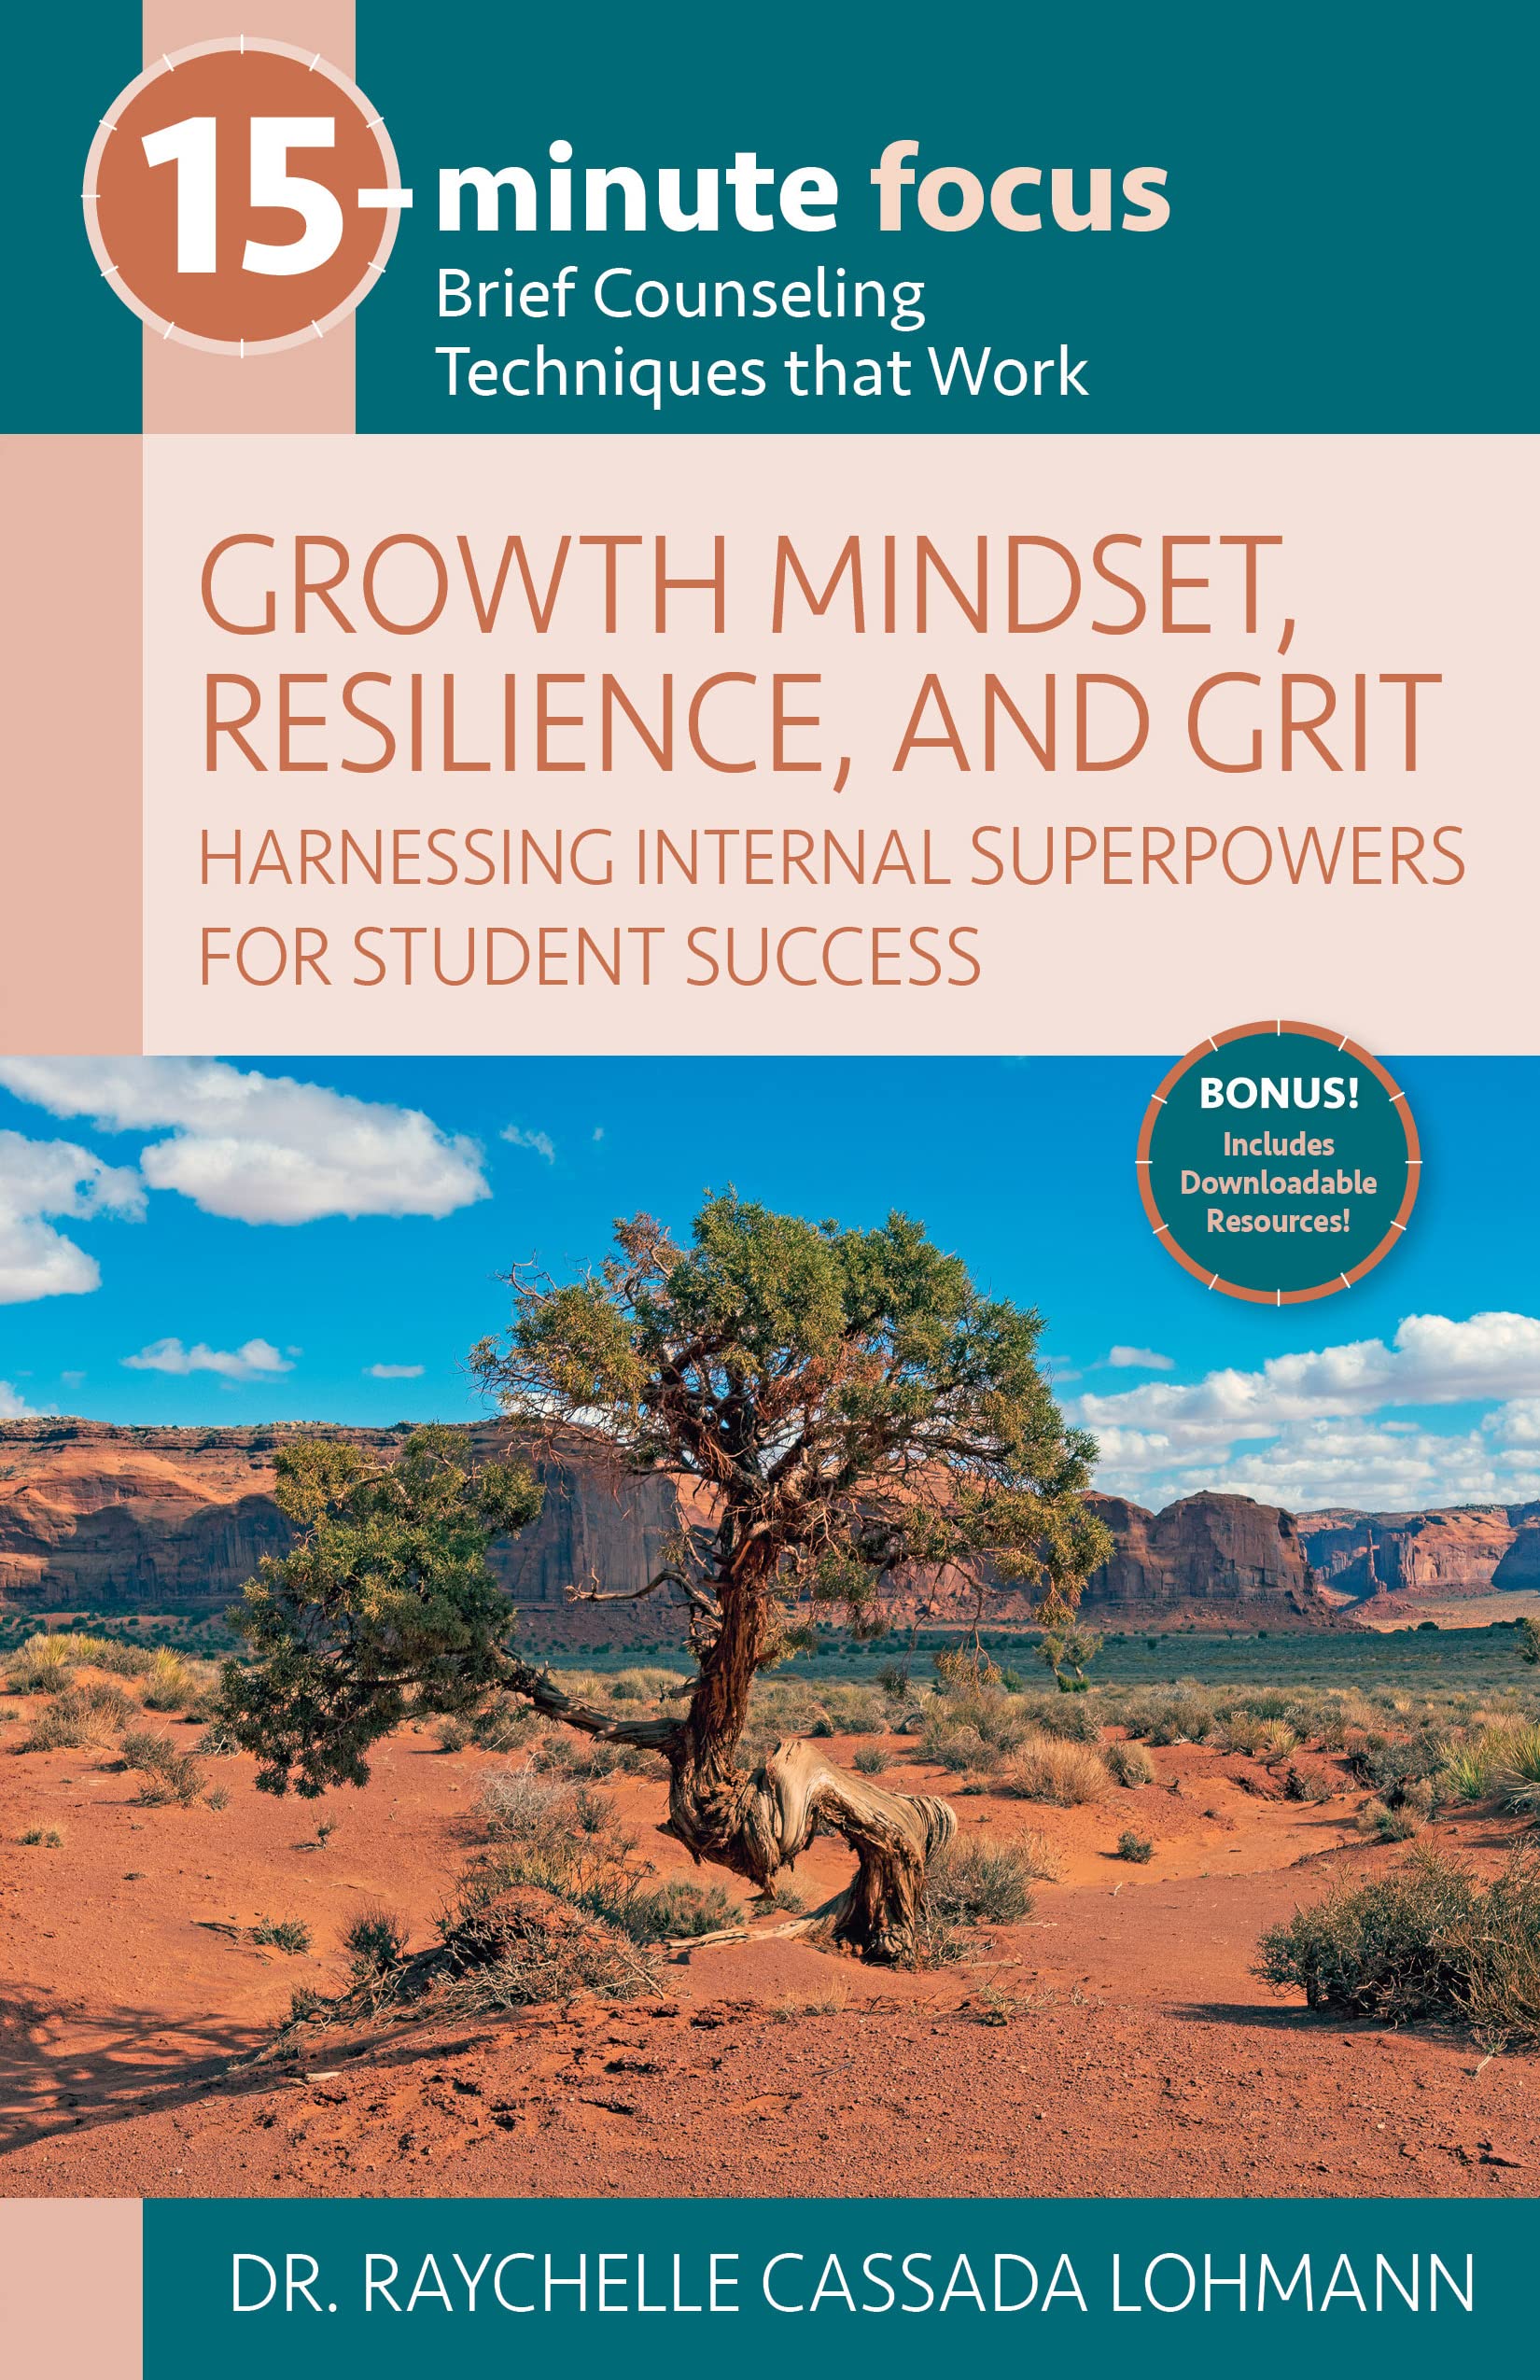 15-Minute Focus - Growth Mindset, Resilience, and Grit